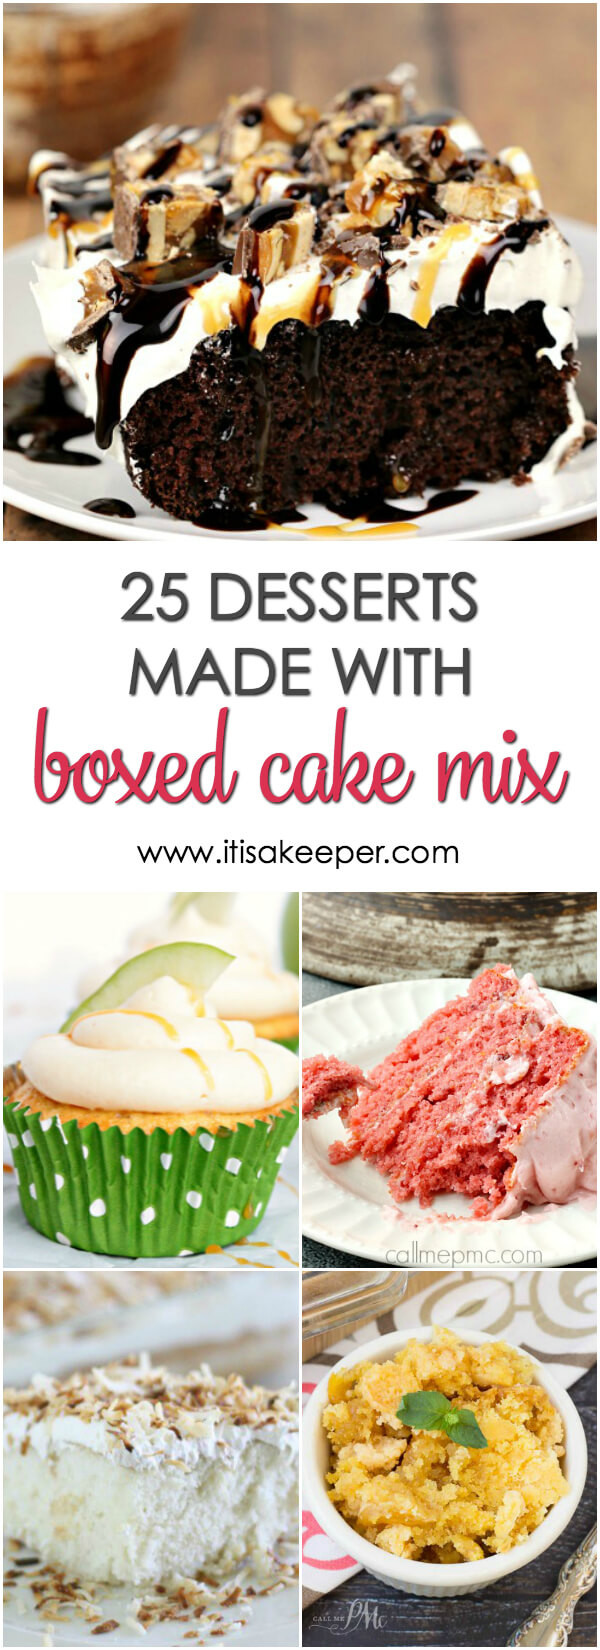 Desserts Using Cake Mix
 25 Desserts Made with Boxed Cake Mix